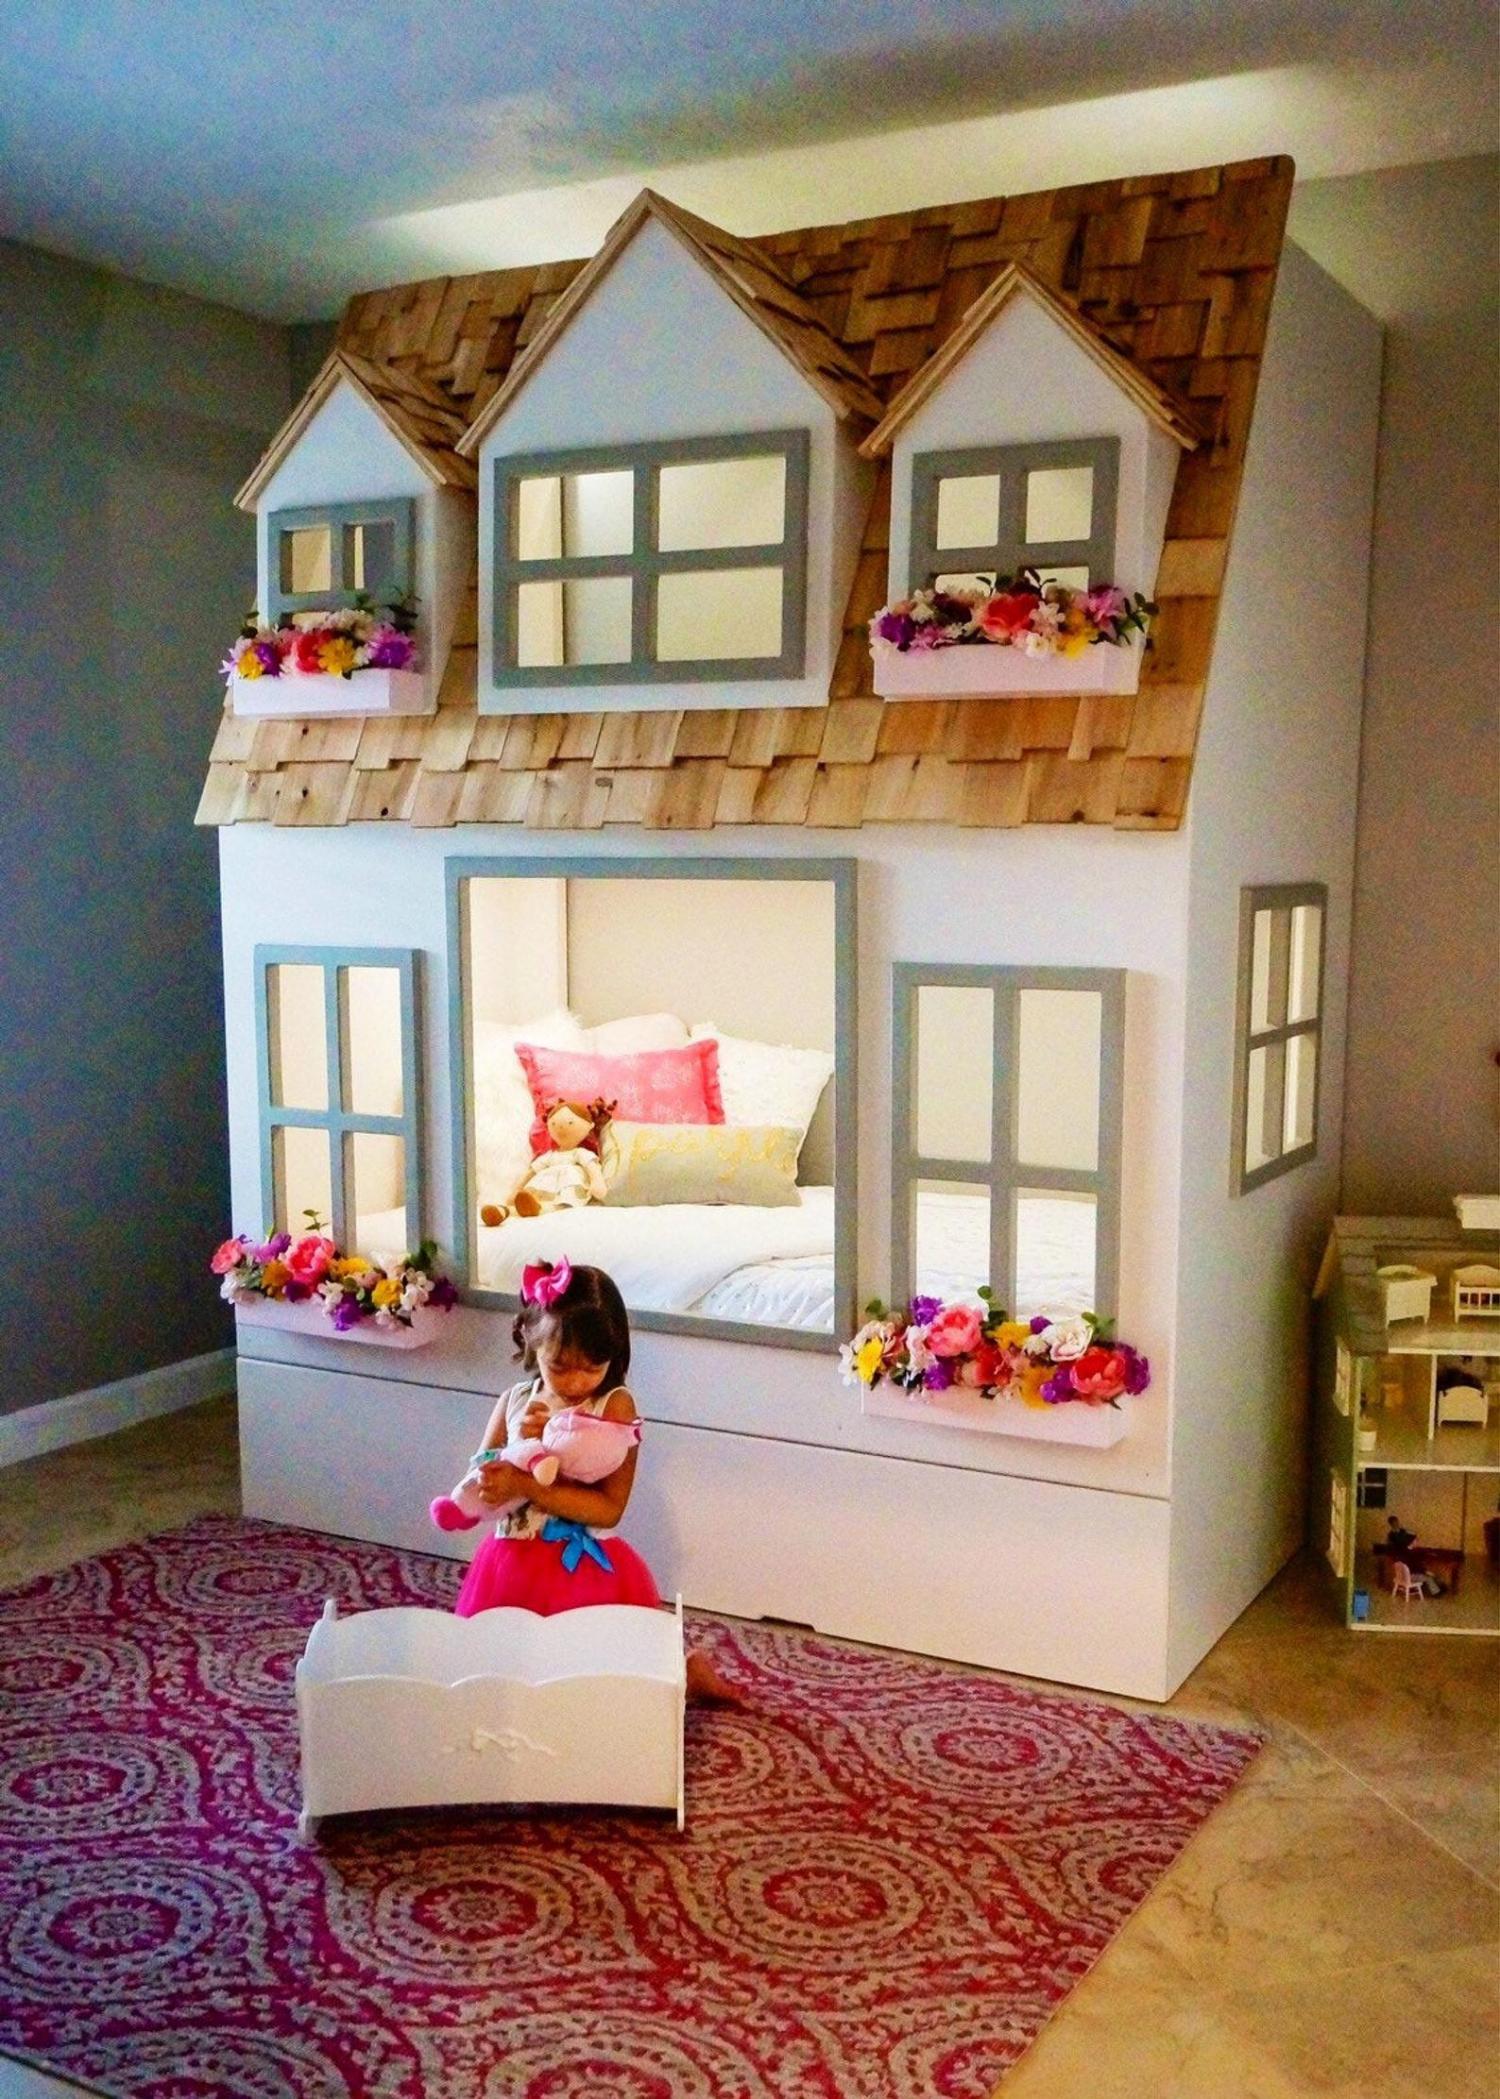 Giant Doll House Kids Bunk Bed, Bunk Beds That Look Like A House